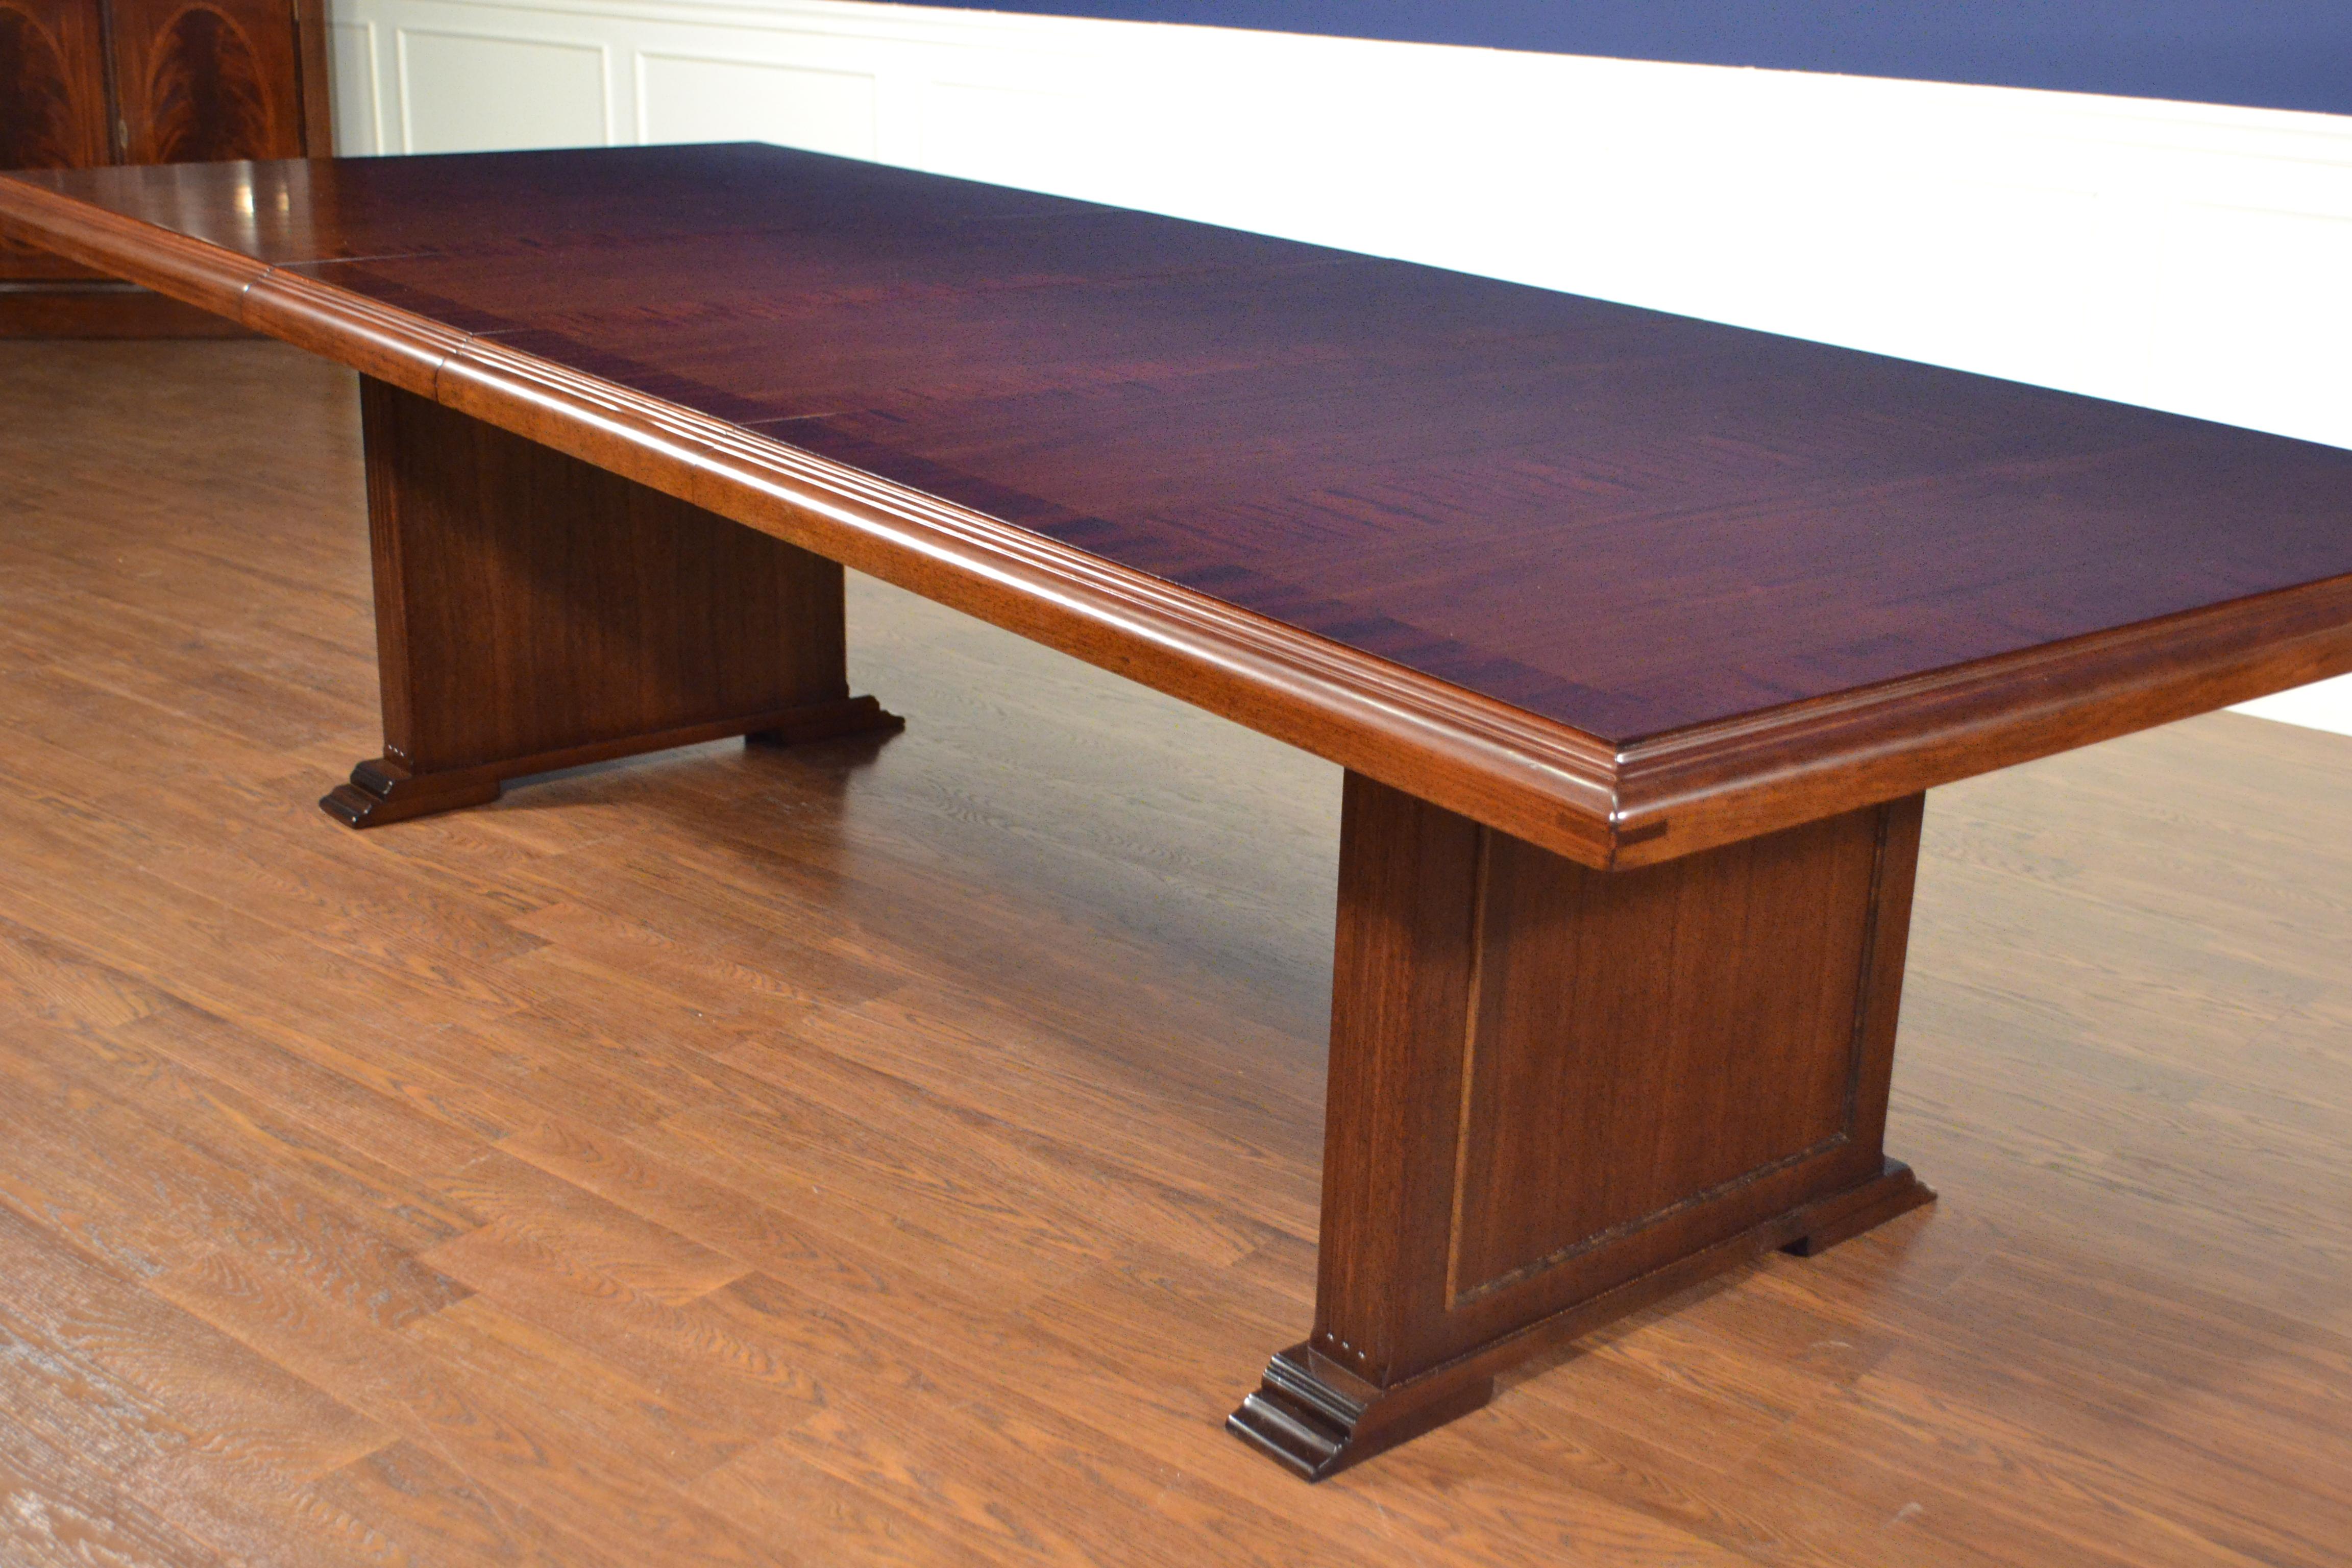 This is a made-to-order mahogany conference table made in the Leighton Hall shop. It features a field of cathedral mahogany with a straight grain mahogany border and a solid mahogany edge. It has two 